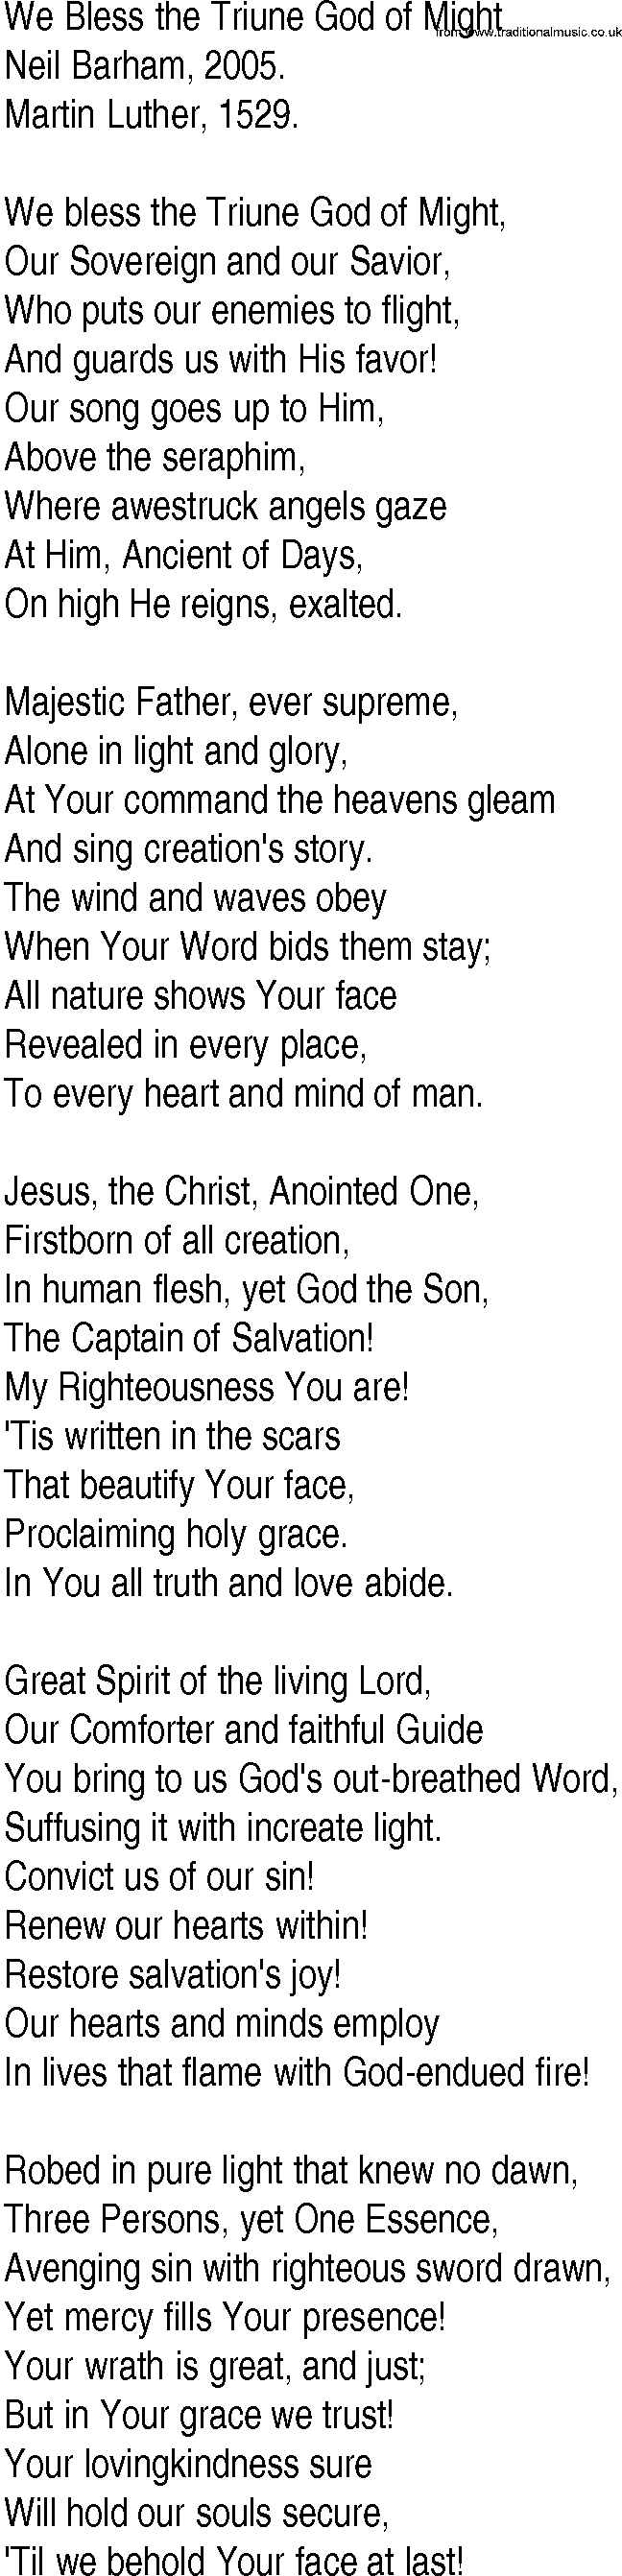 Hymn and Gospel Song: We Bless the Triune God of Might by Neil Barham lyrics